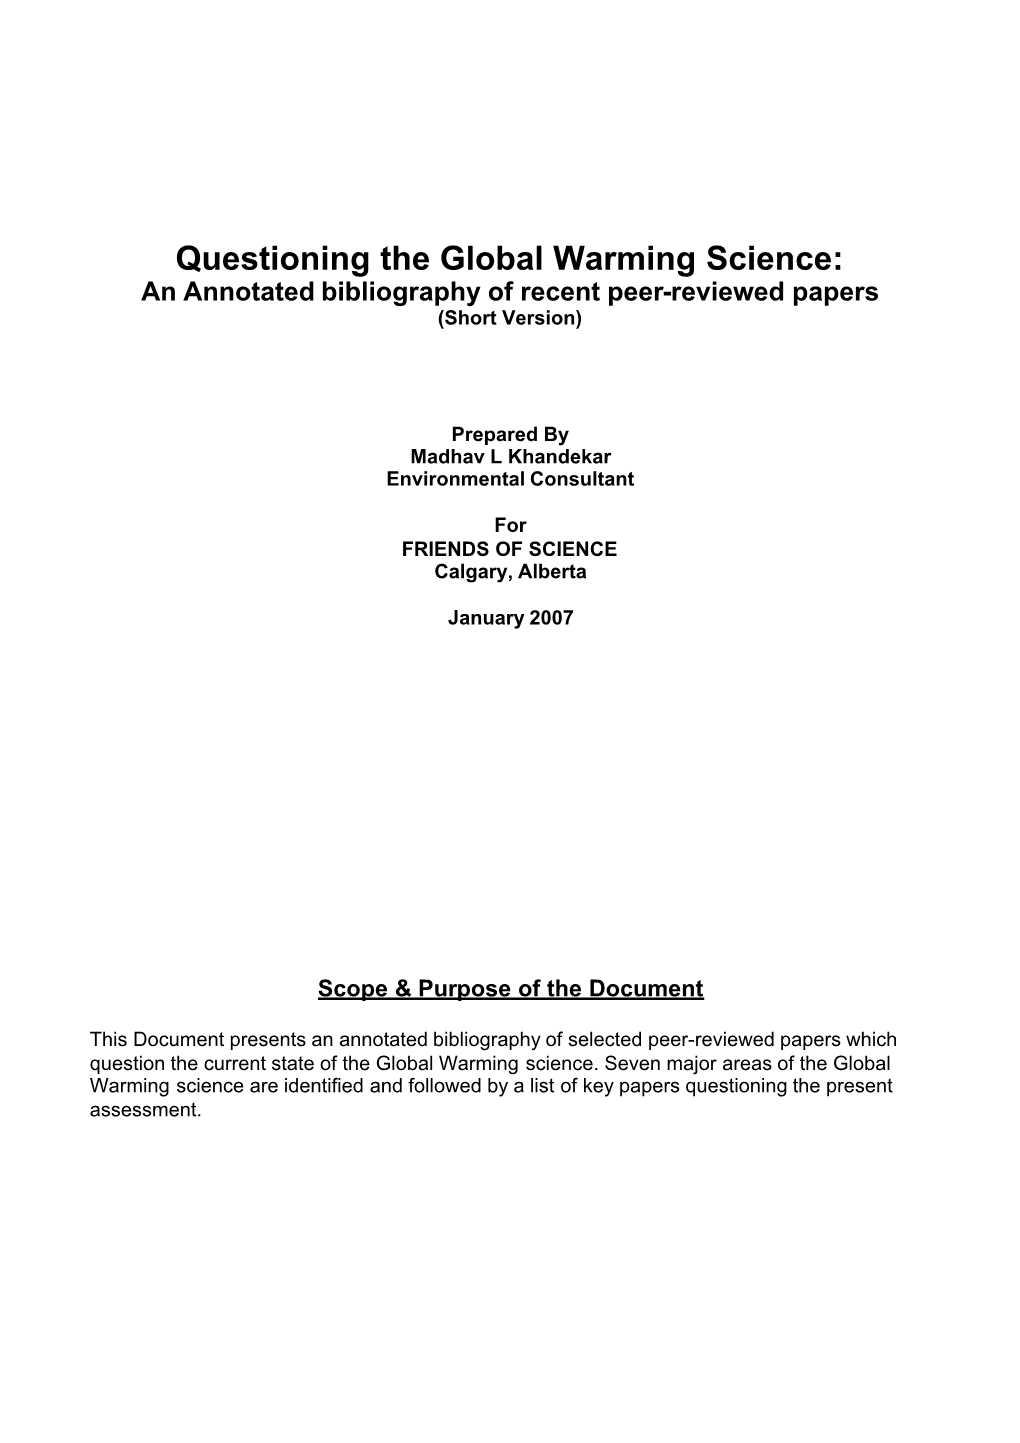 Questioning the Global Warming Science: an Annotated Bibliography of Recent Peer-Reviewed Papers (Short Version)